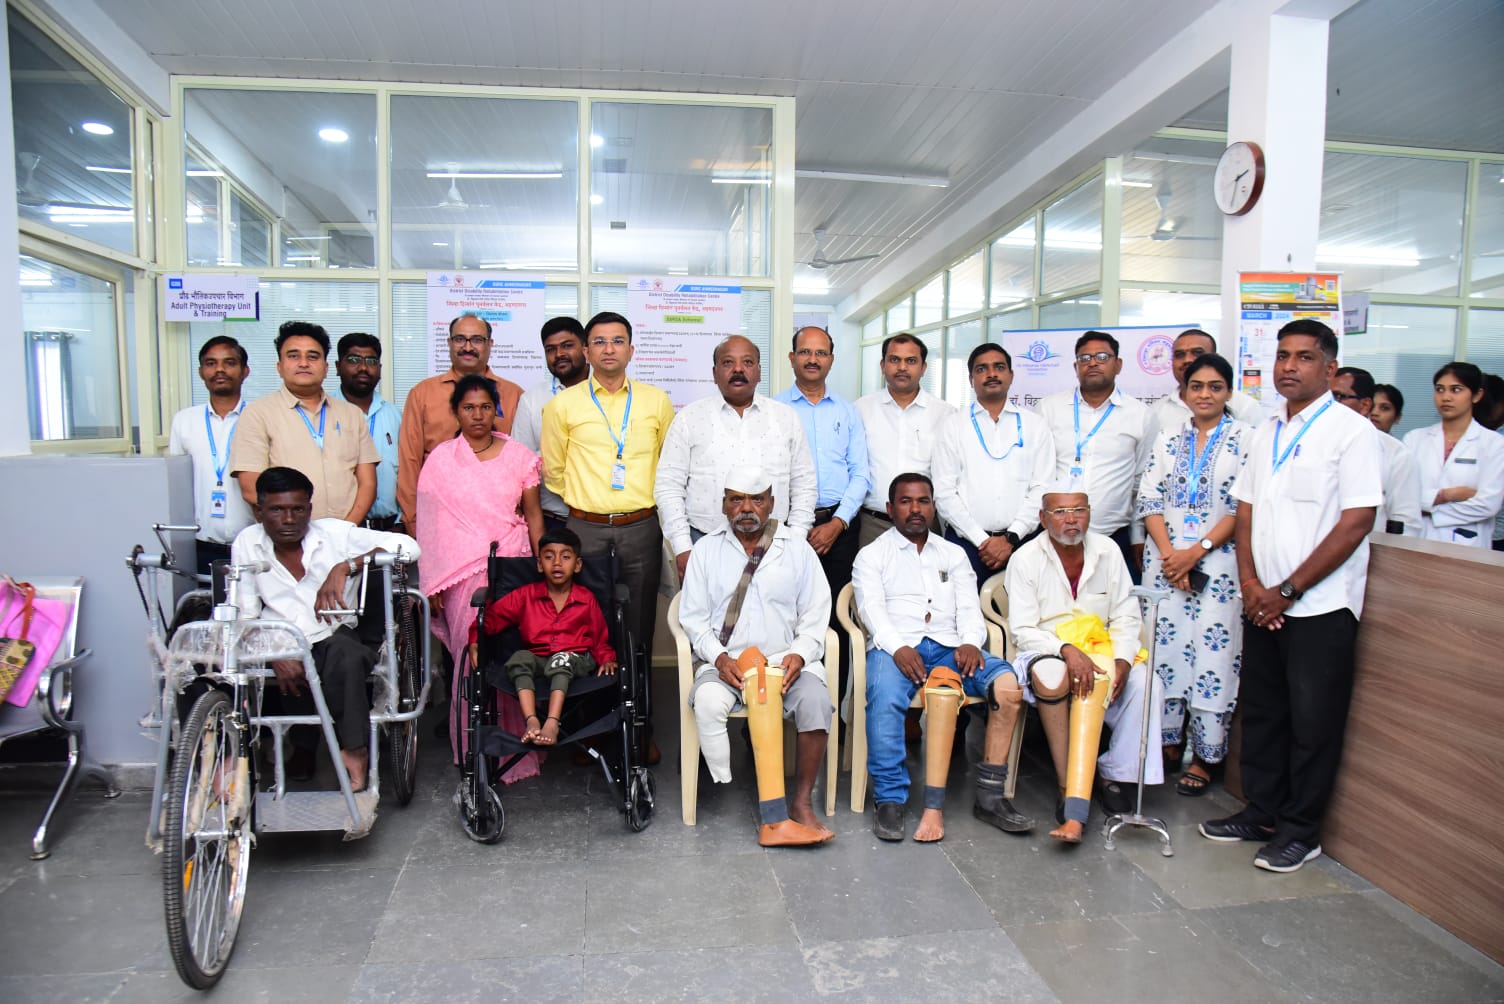 Distribution of Assistive Devices 